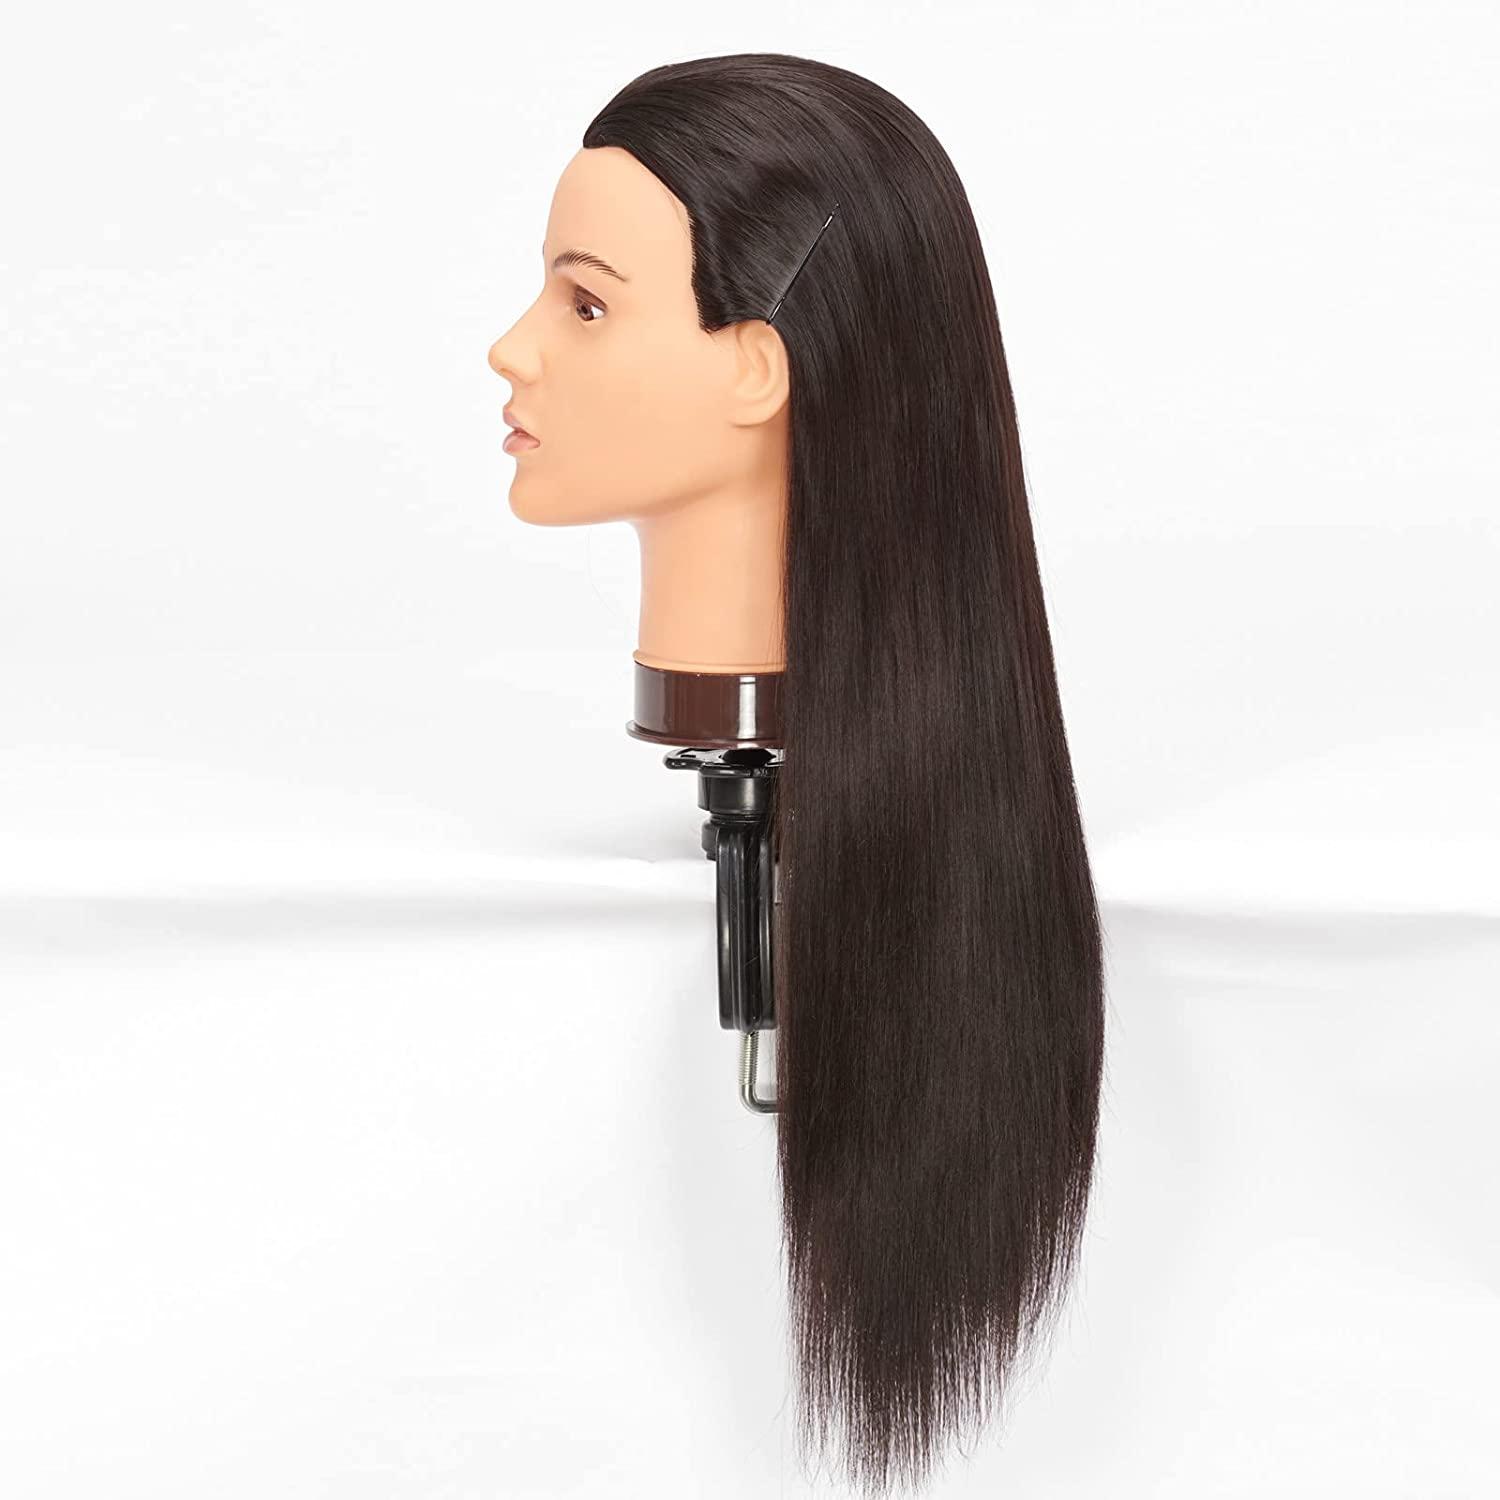 Training Head 26-28 Mannequin Head Synthetic Fiber Cosmetology